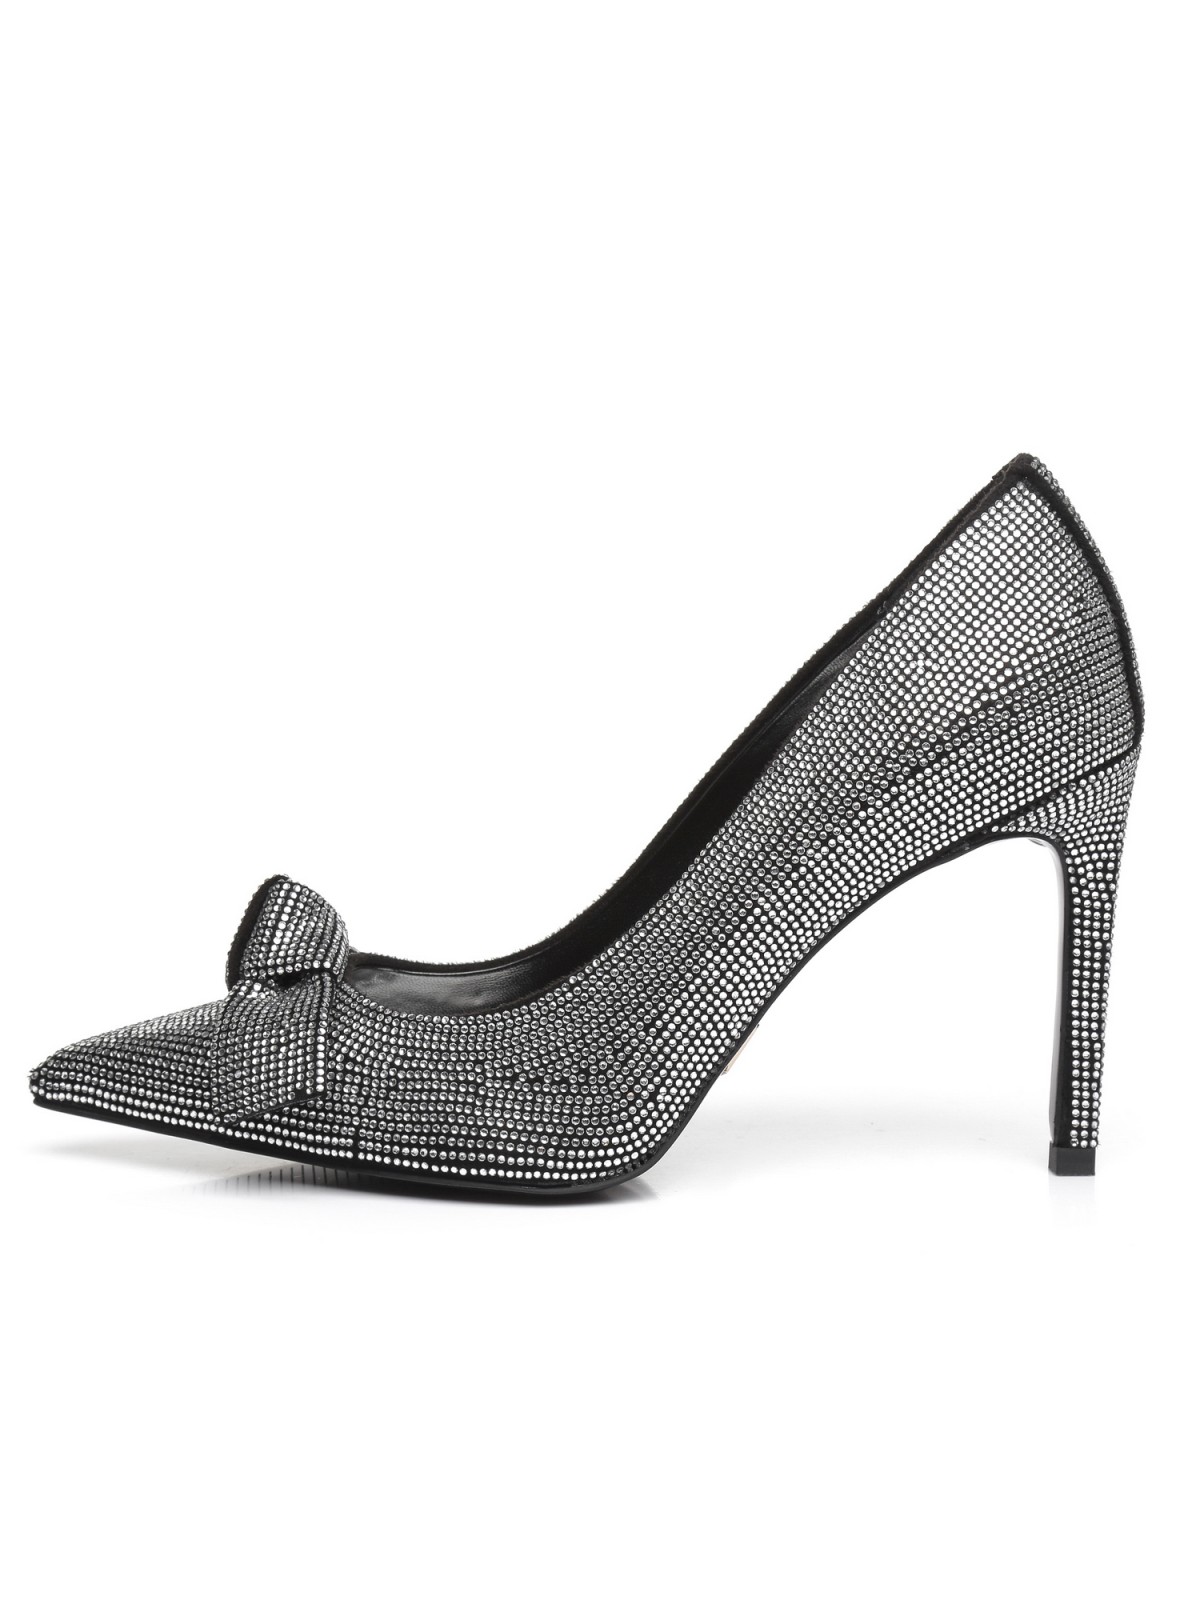 Giaro MADELINE pumps with silver shiny crystals